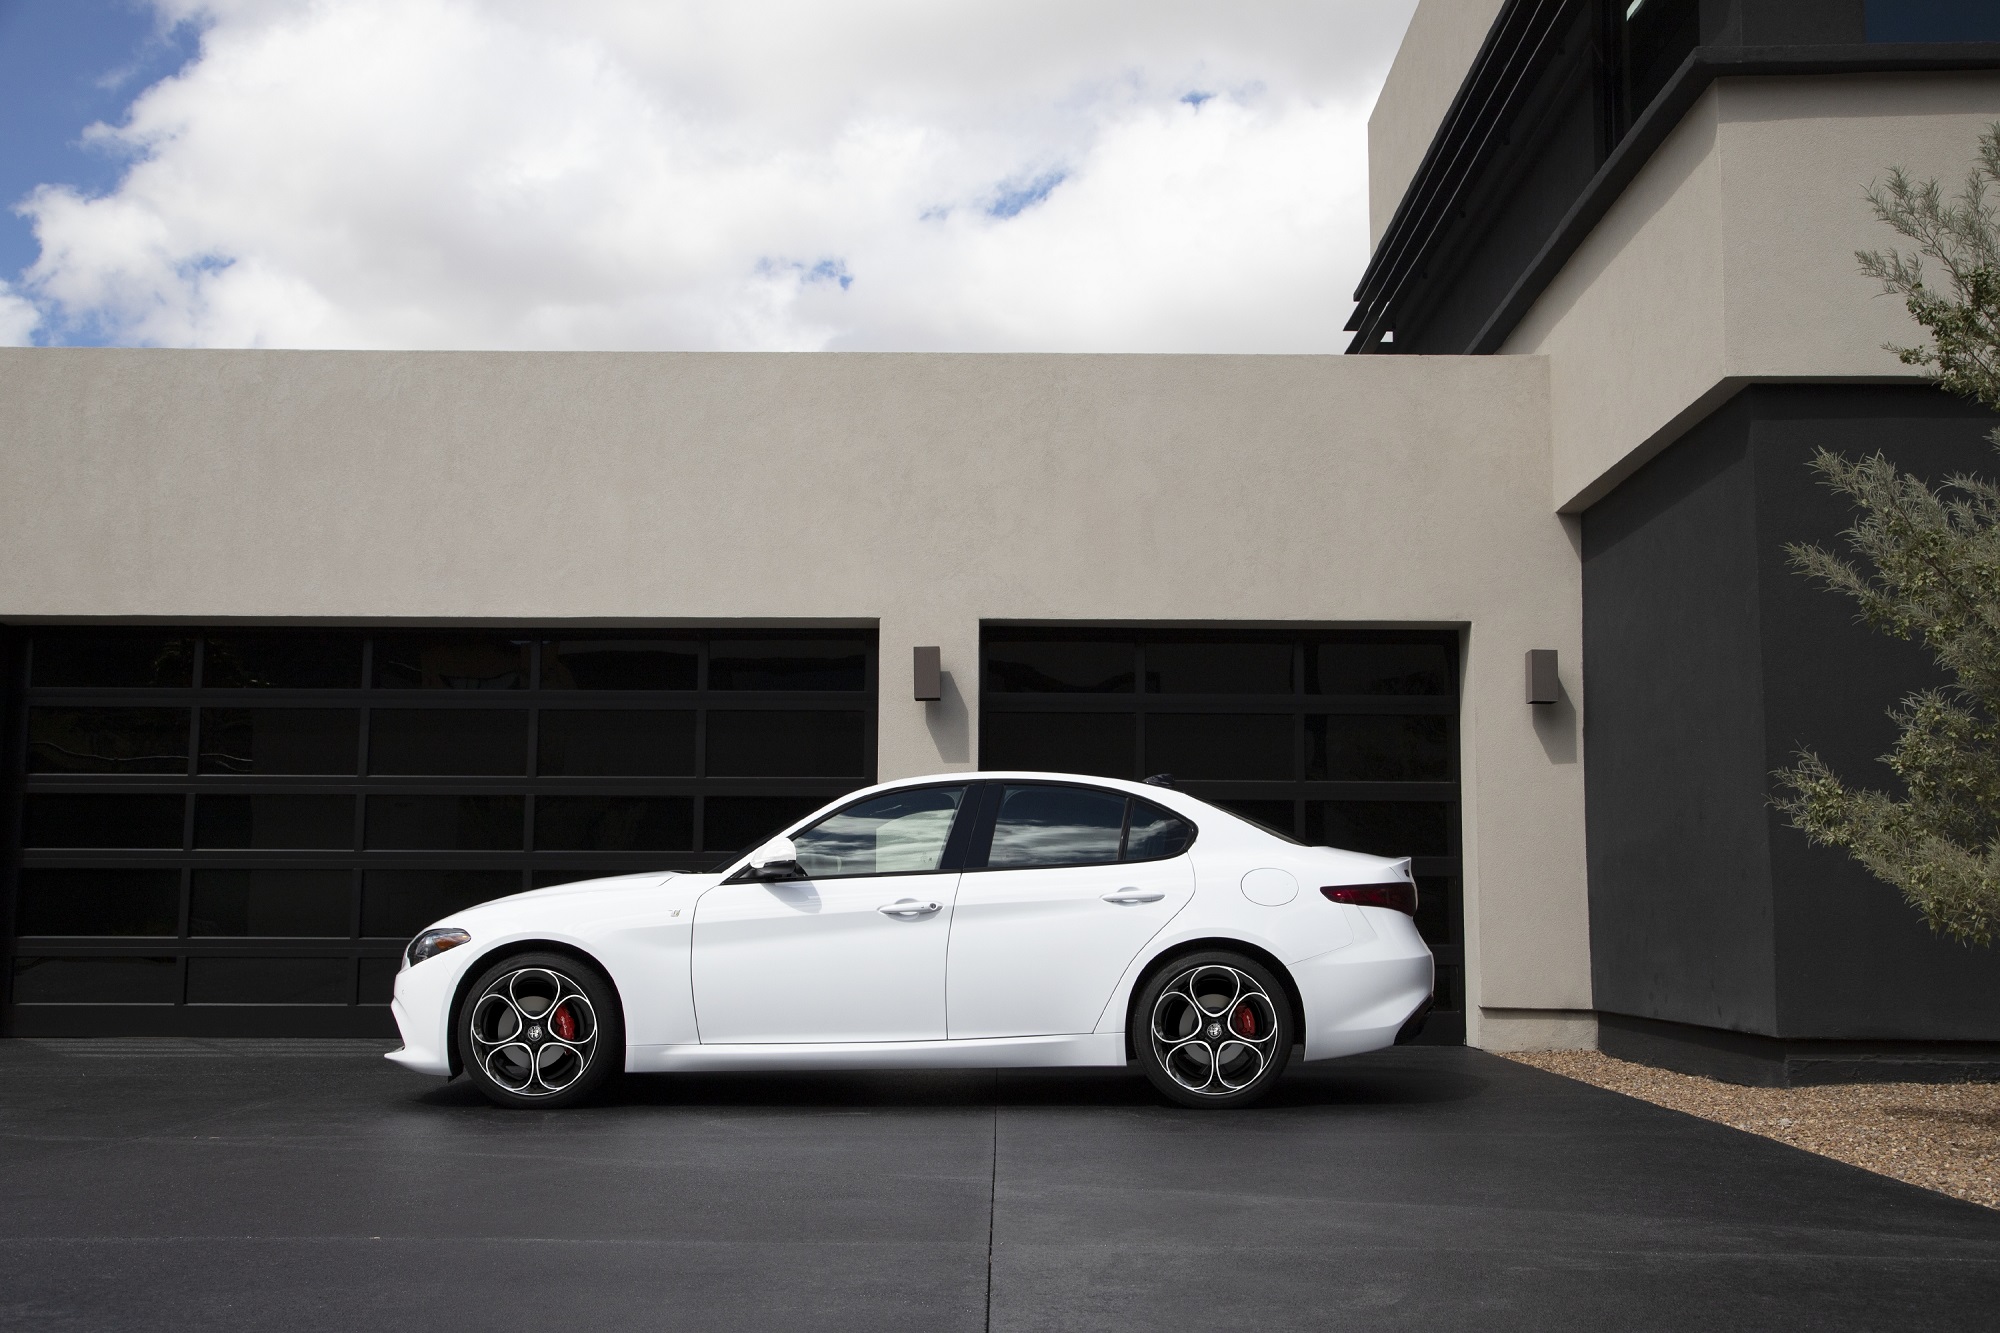 Alfa Romeo Giulia reliability is a concern for many potential owners.